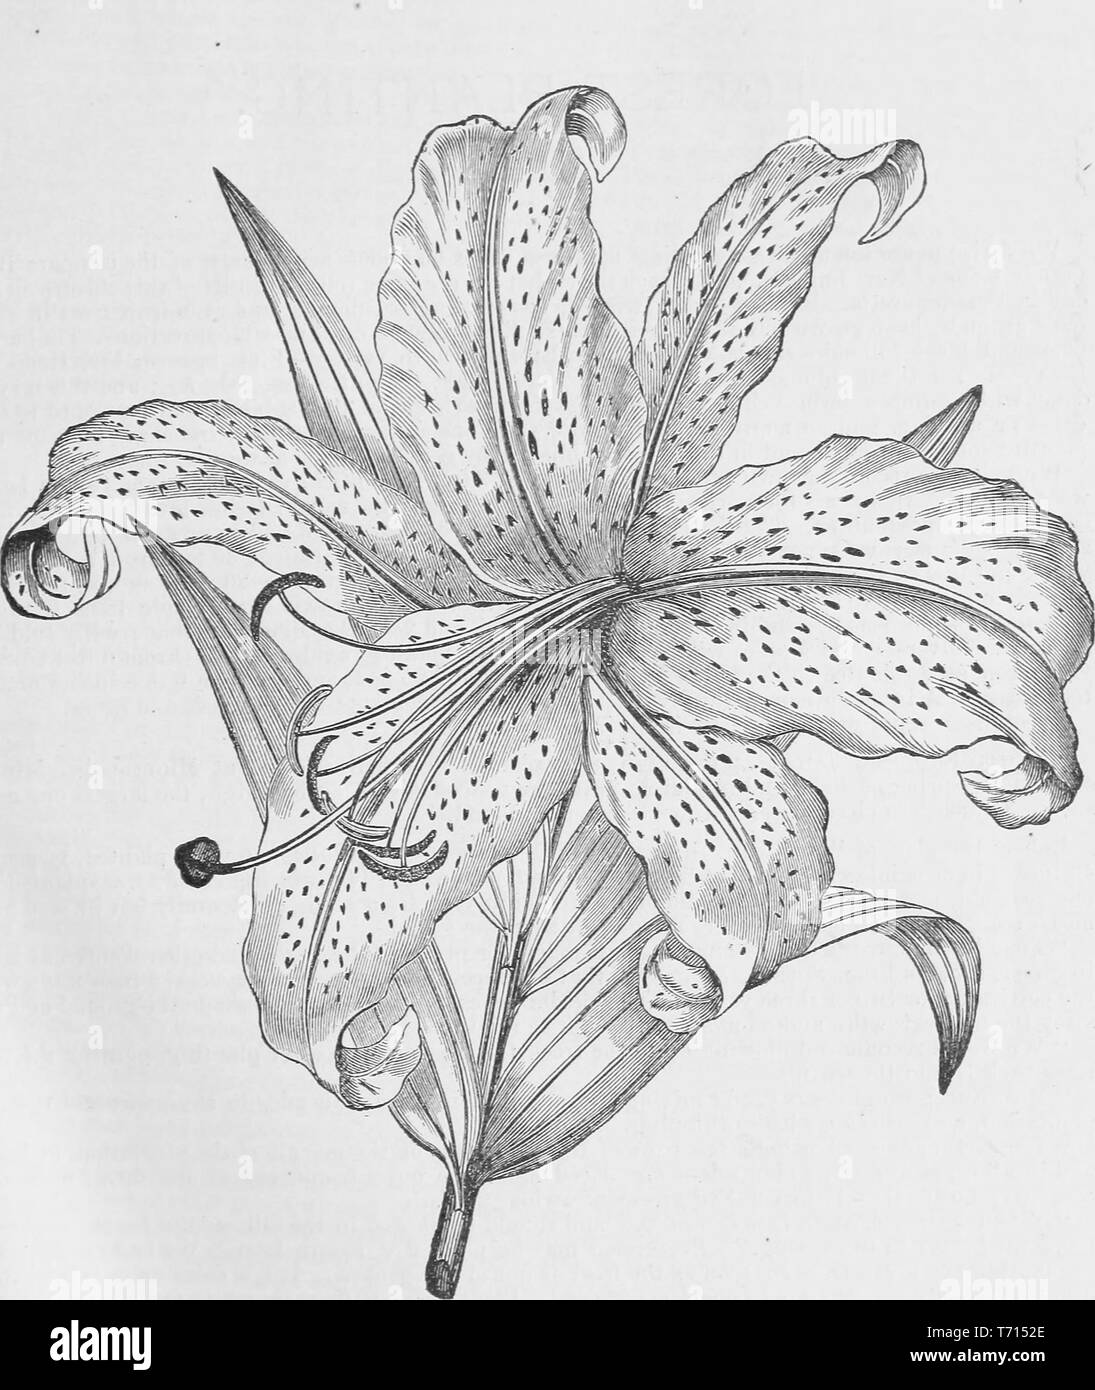 Engraved drawing of the mountain lily (Lilium Auratum) flower, from the book 'Reading Nursery' by Henry G. Gilbert, 1875. Courtesy Internet Archive. () Stock Photo